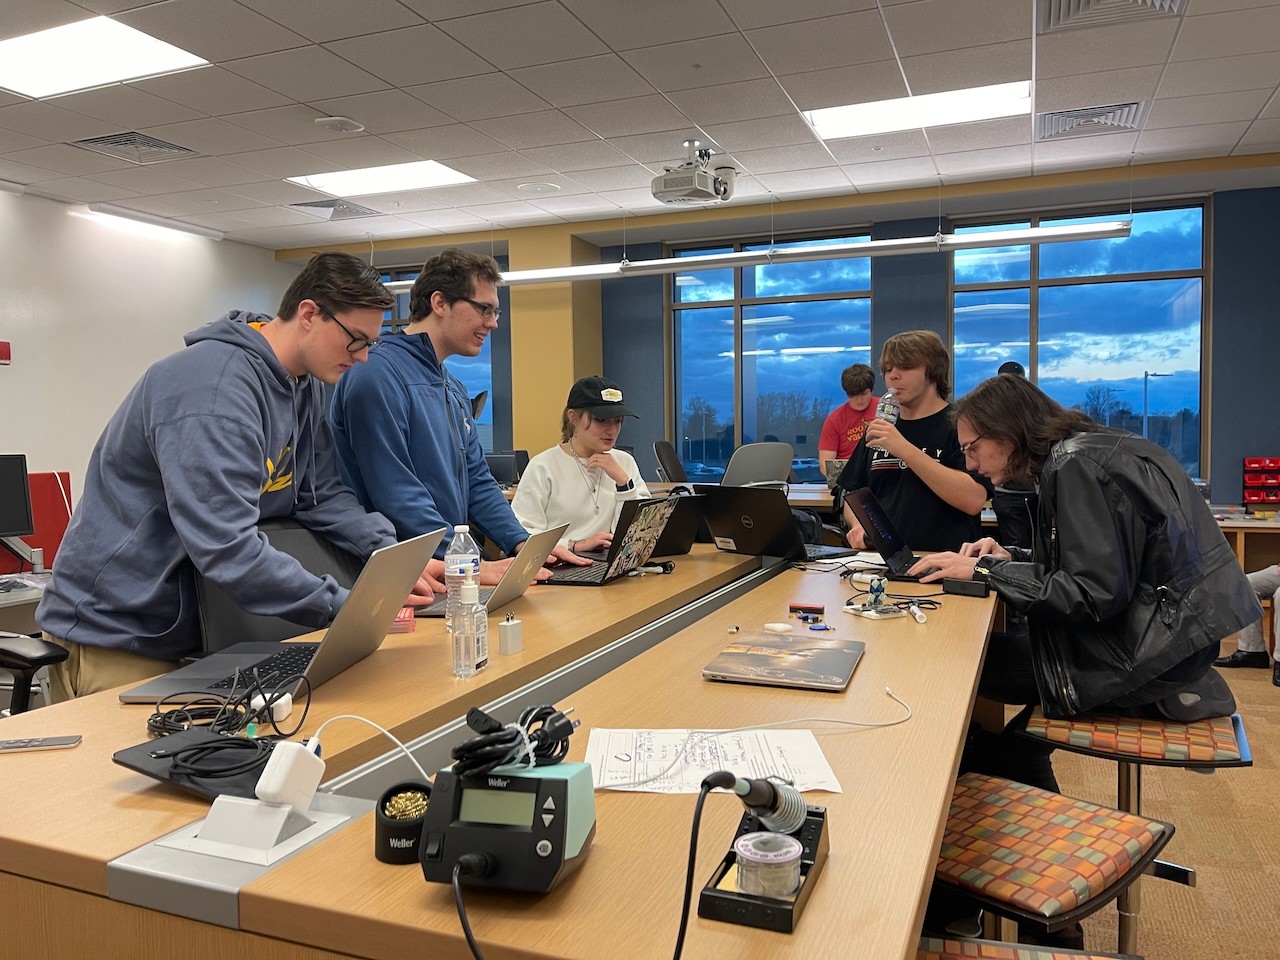 A photo of students working on IoT projects